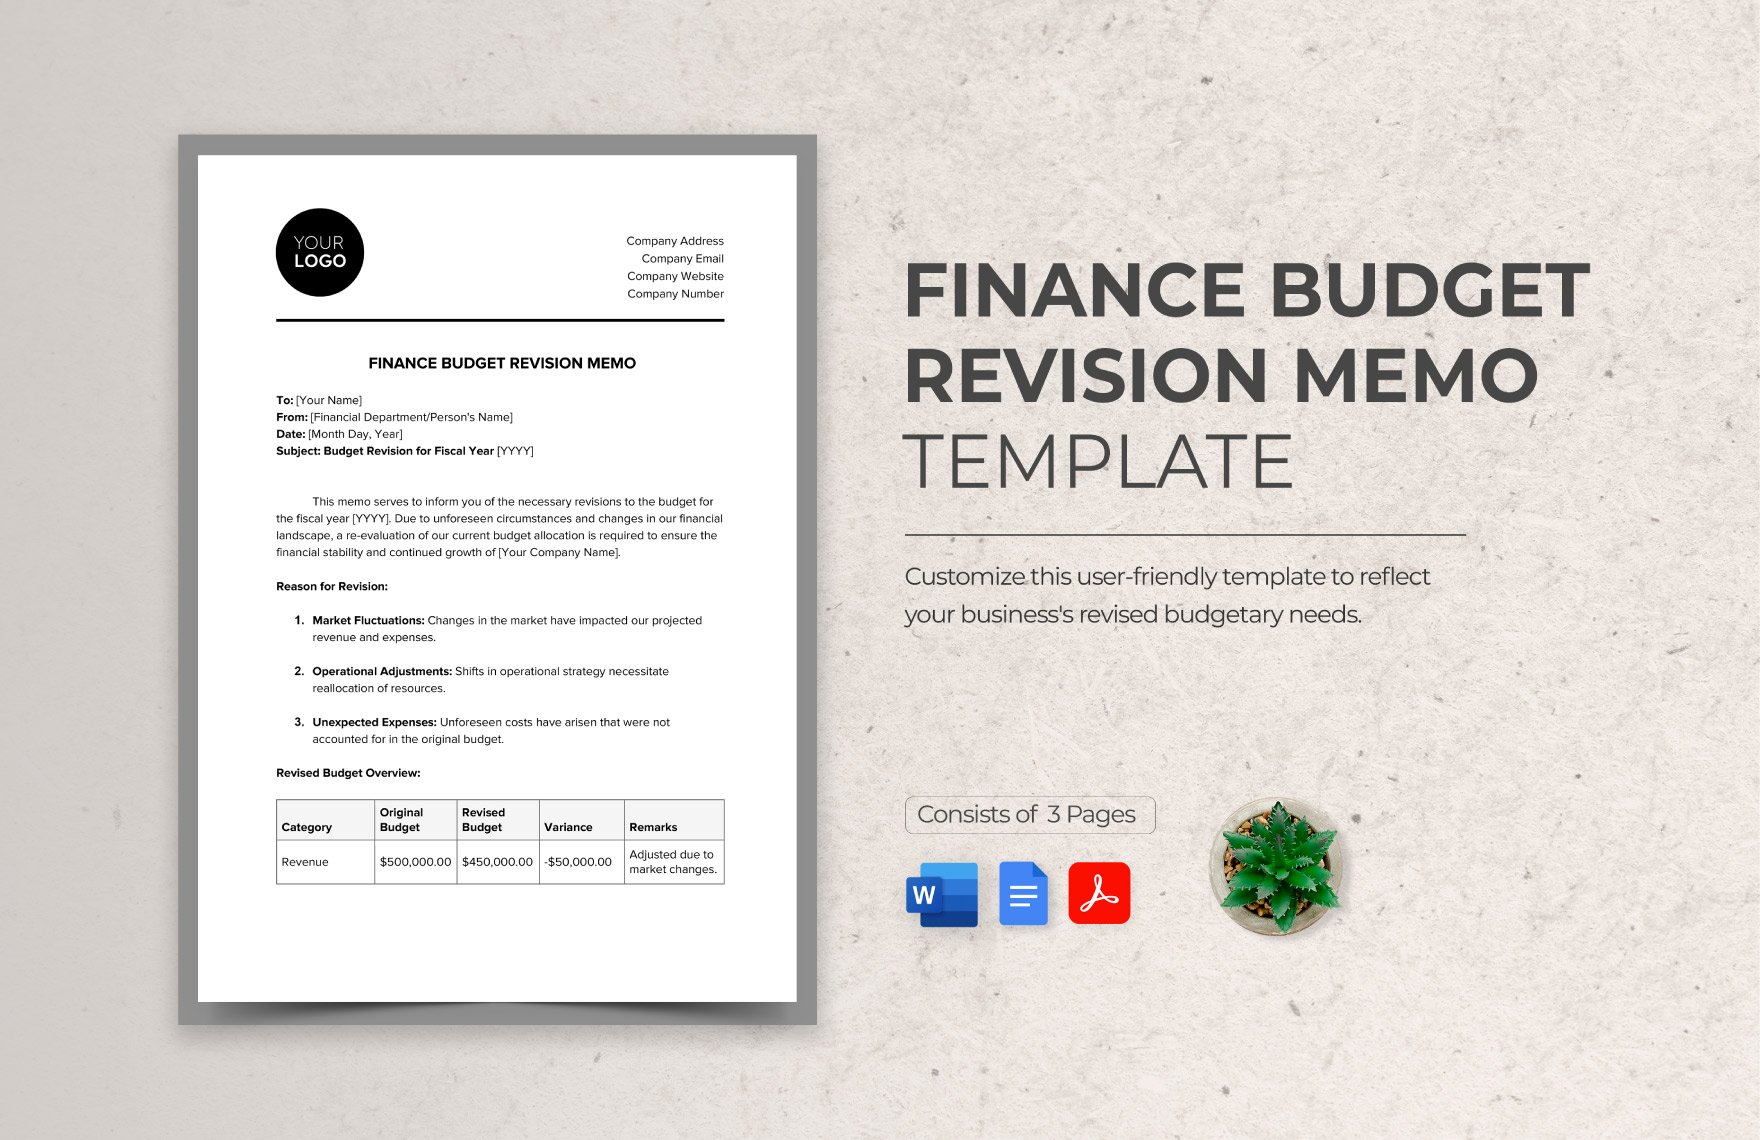 Finance Budget Revision Memo Template